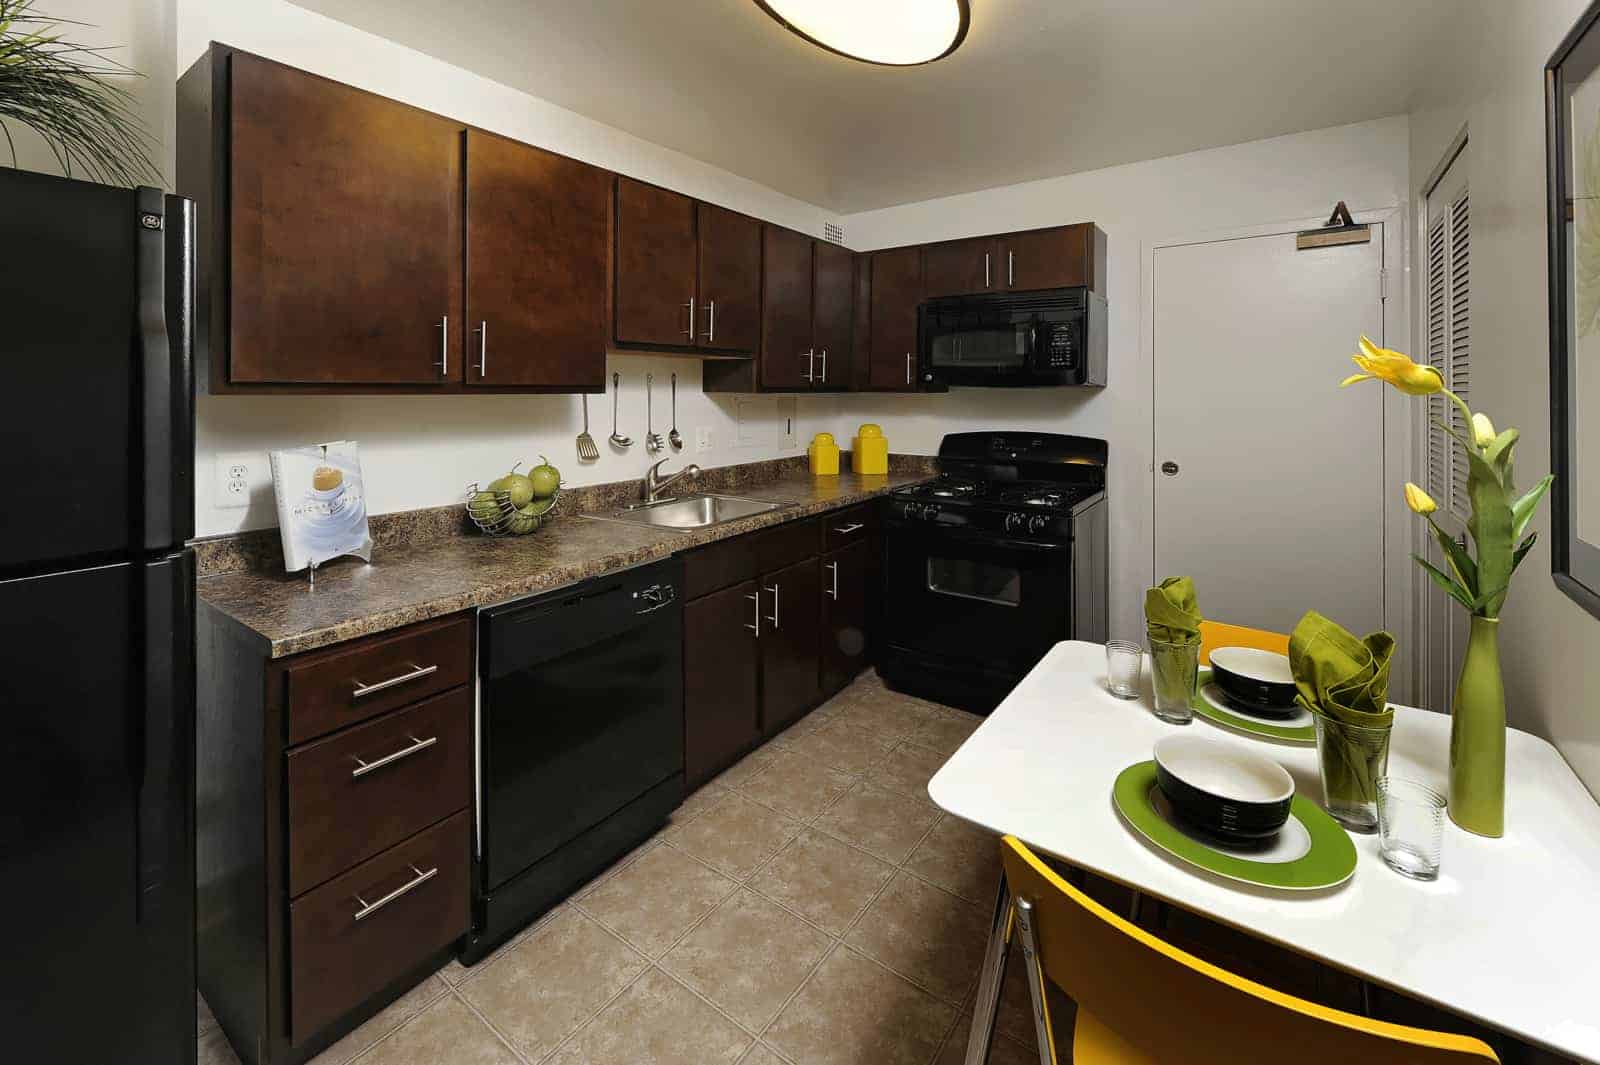 Interior of kitchen with black appliances and brown cabinets.